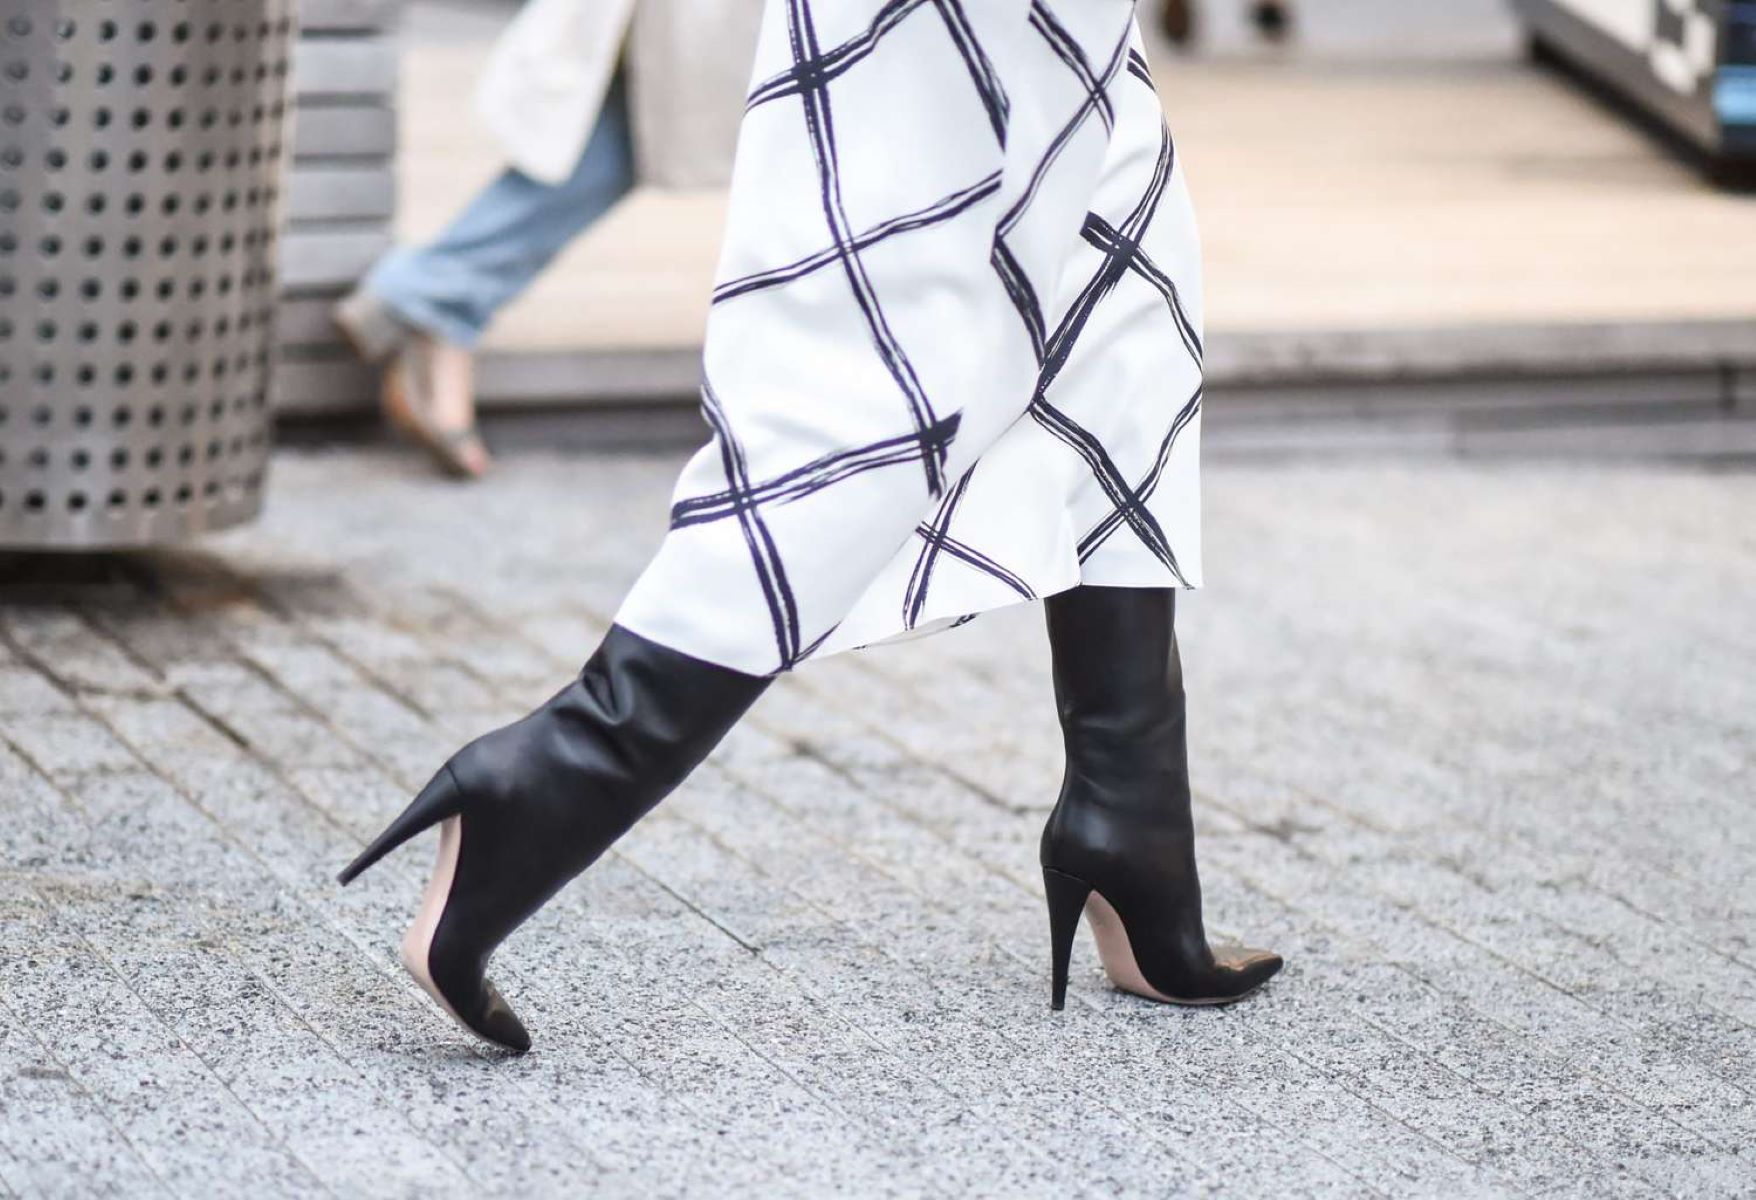 Master The Art Of Walking In High Heel Boots With These Simple Tips!